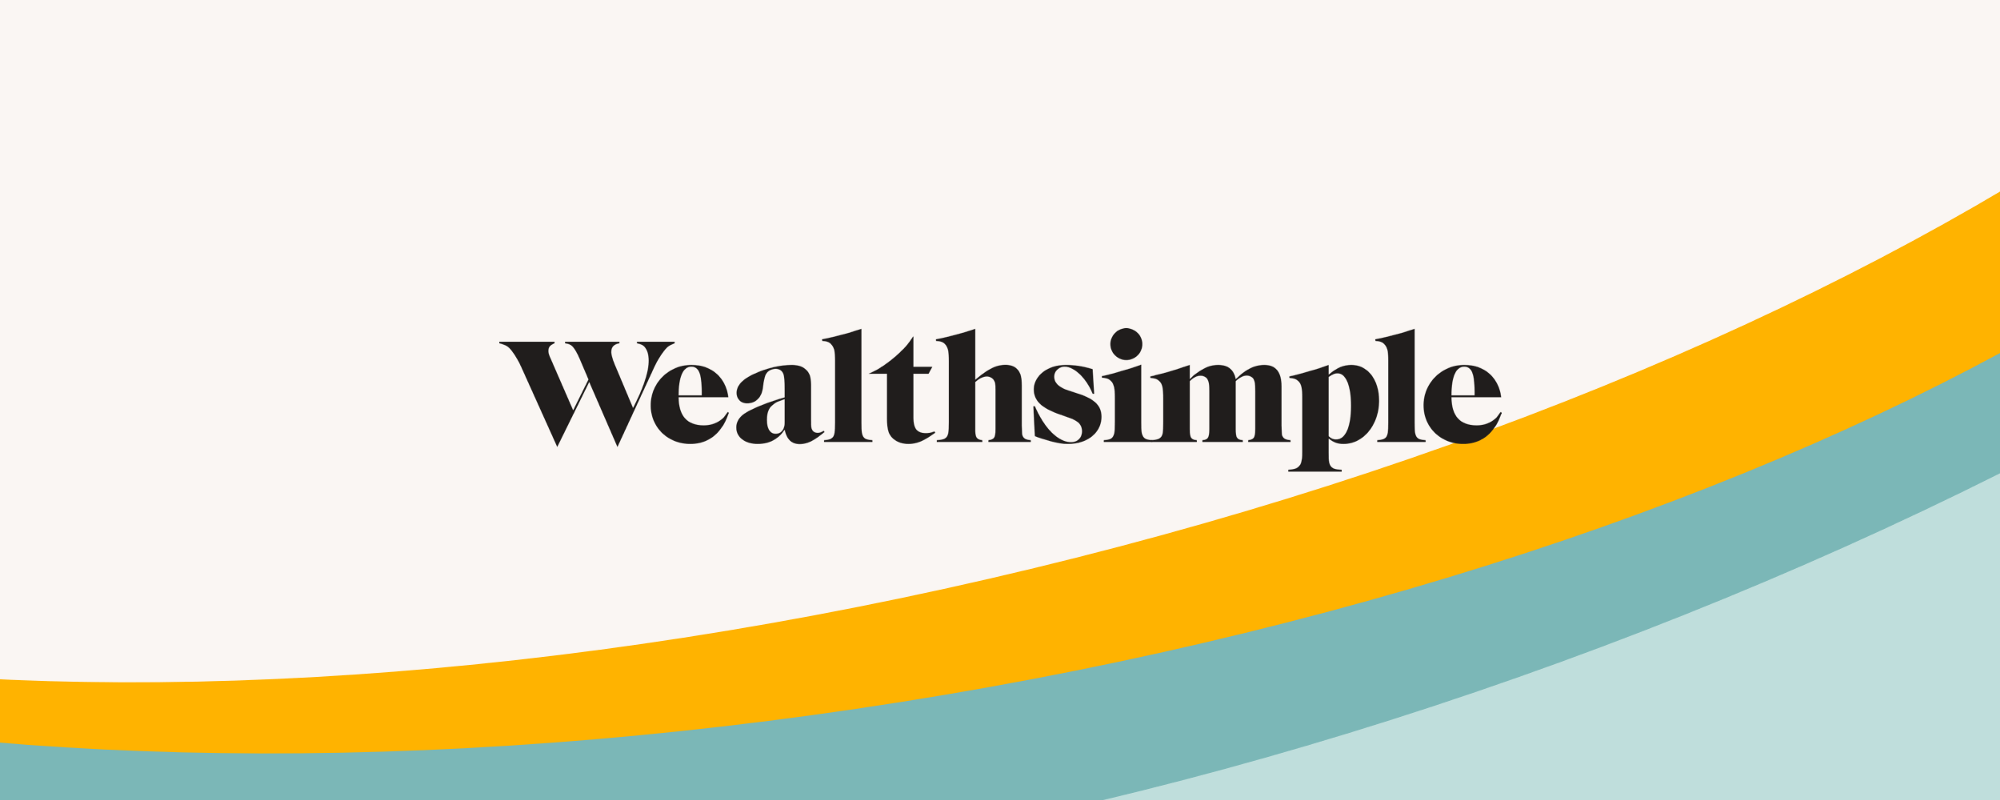 Wealthsimple offers its customers a novel approach to ...